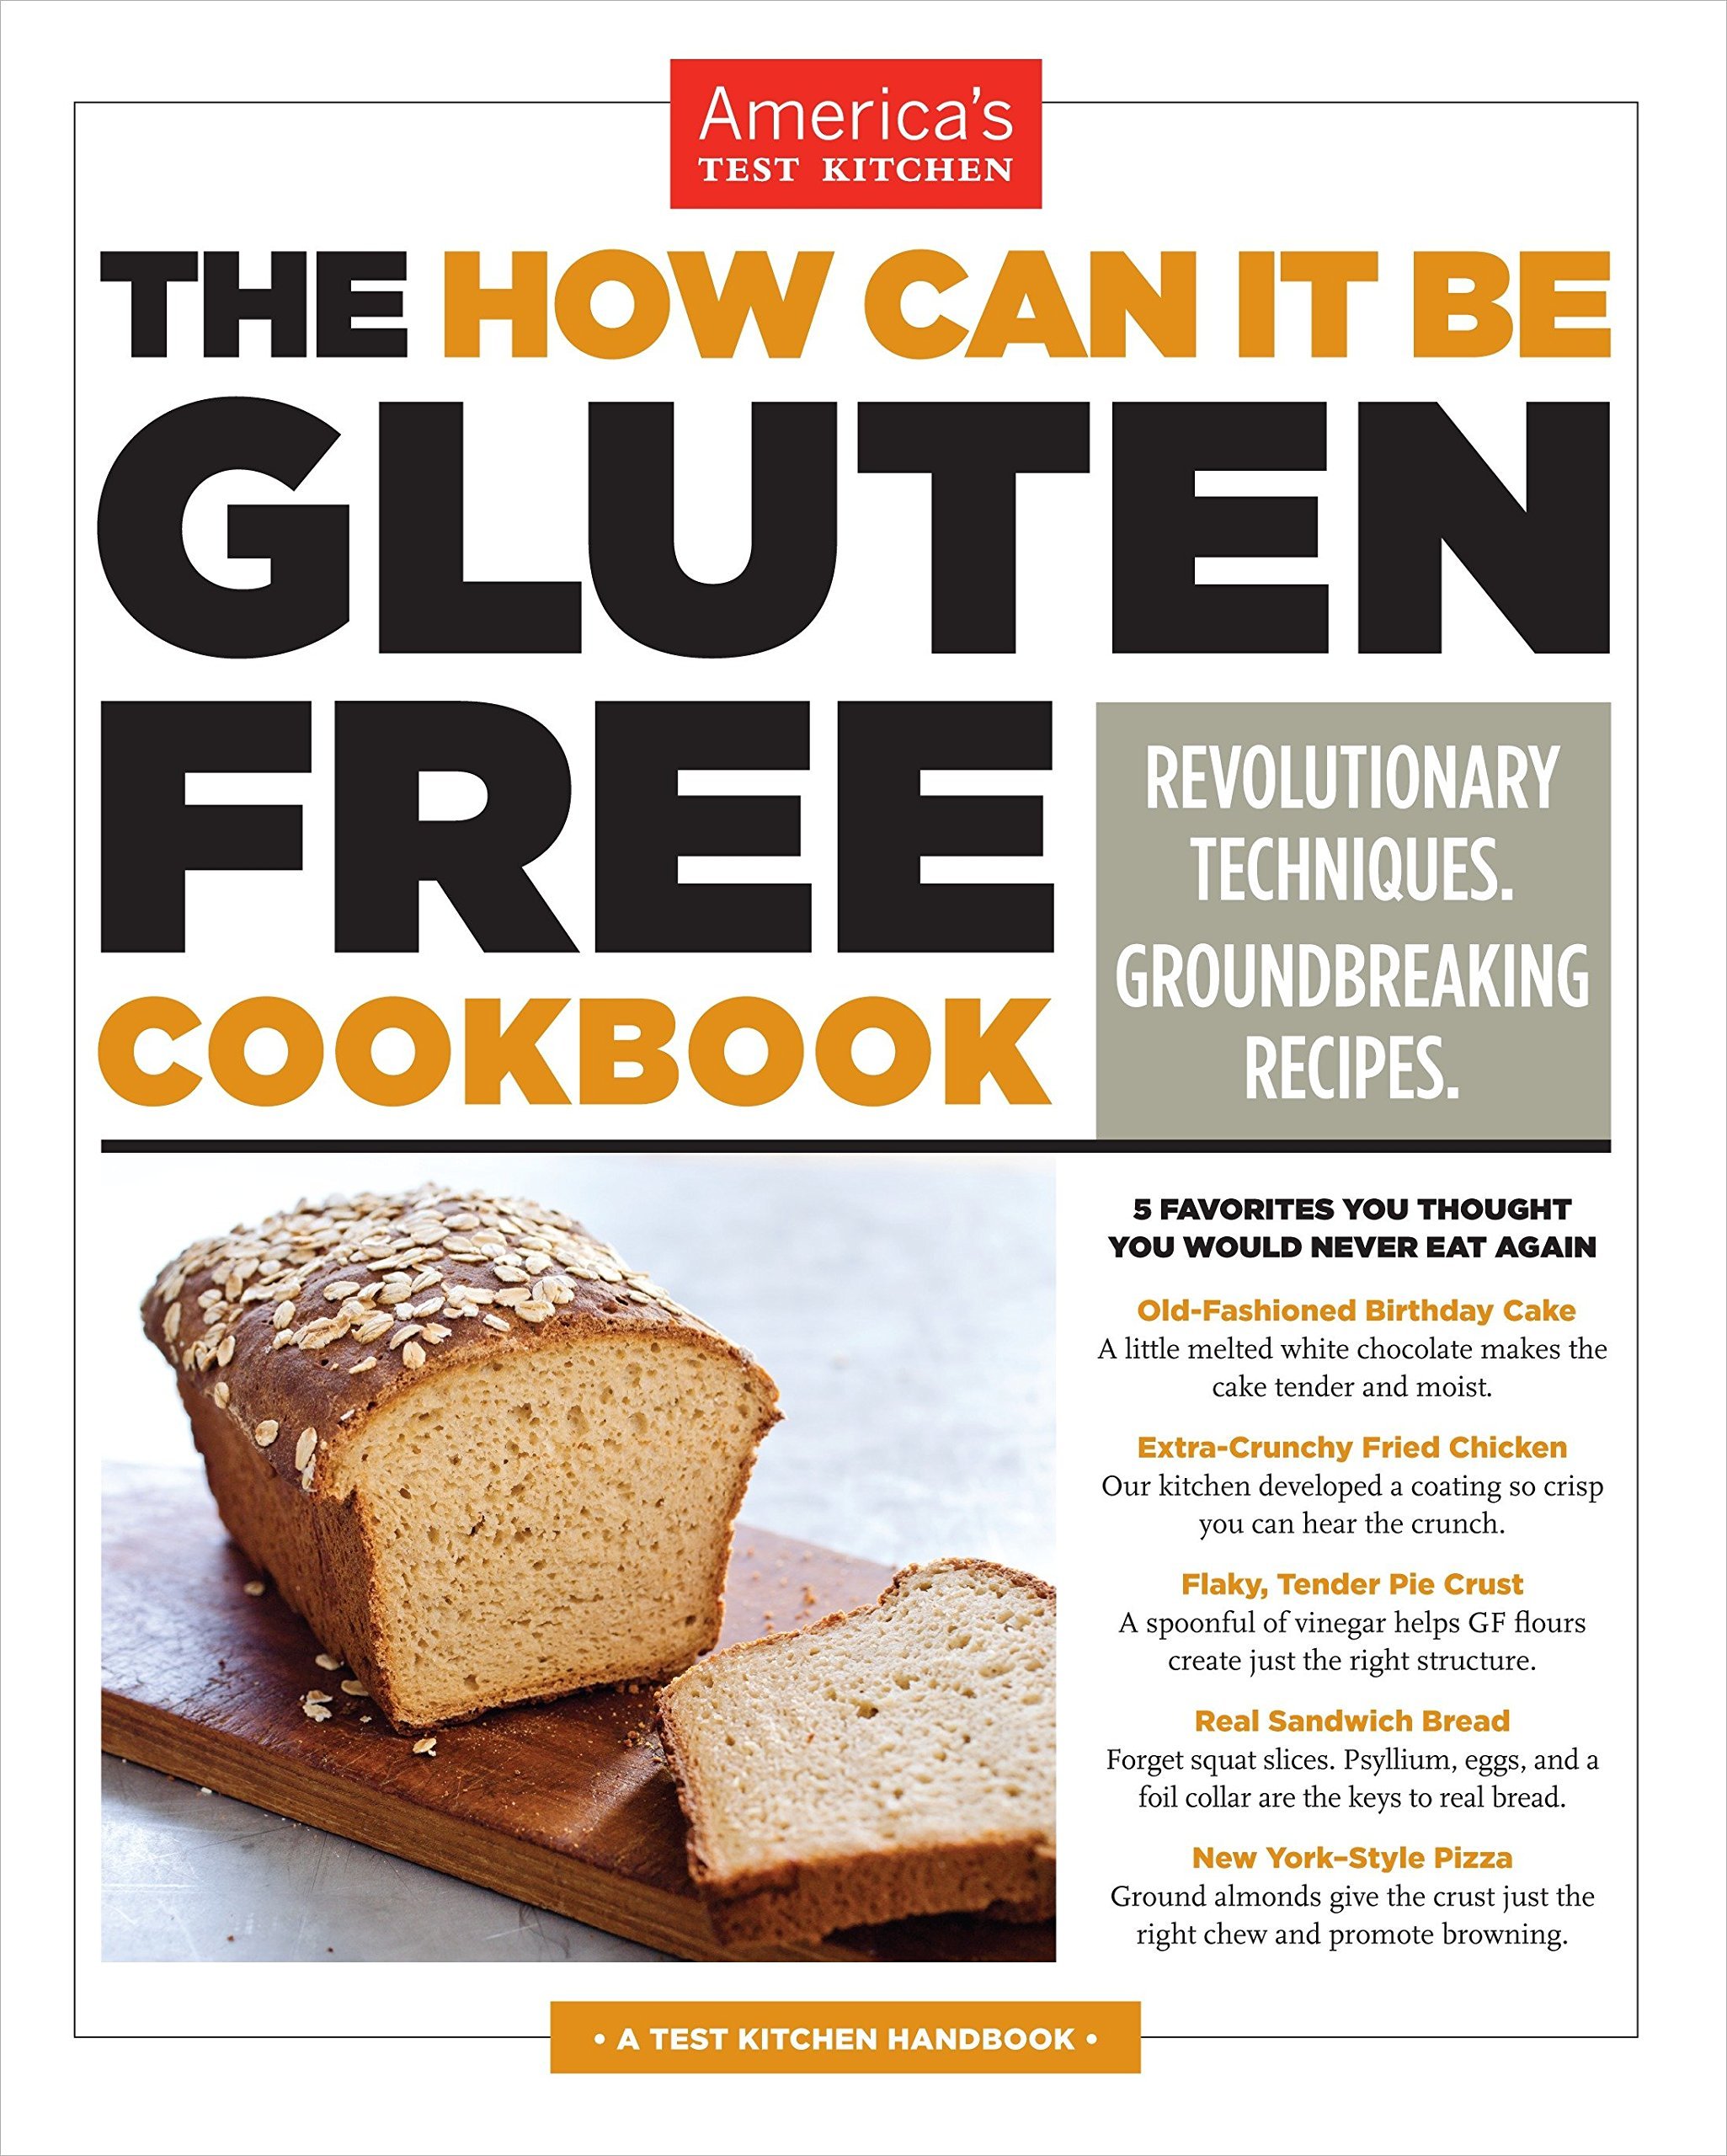 The How Can It Be Gluten Free Cookbook by America